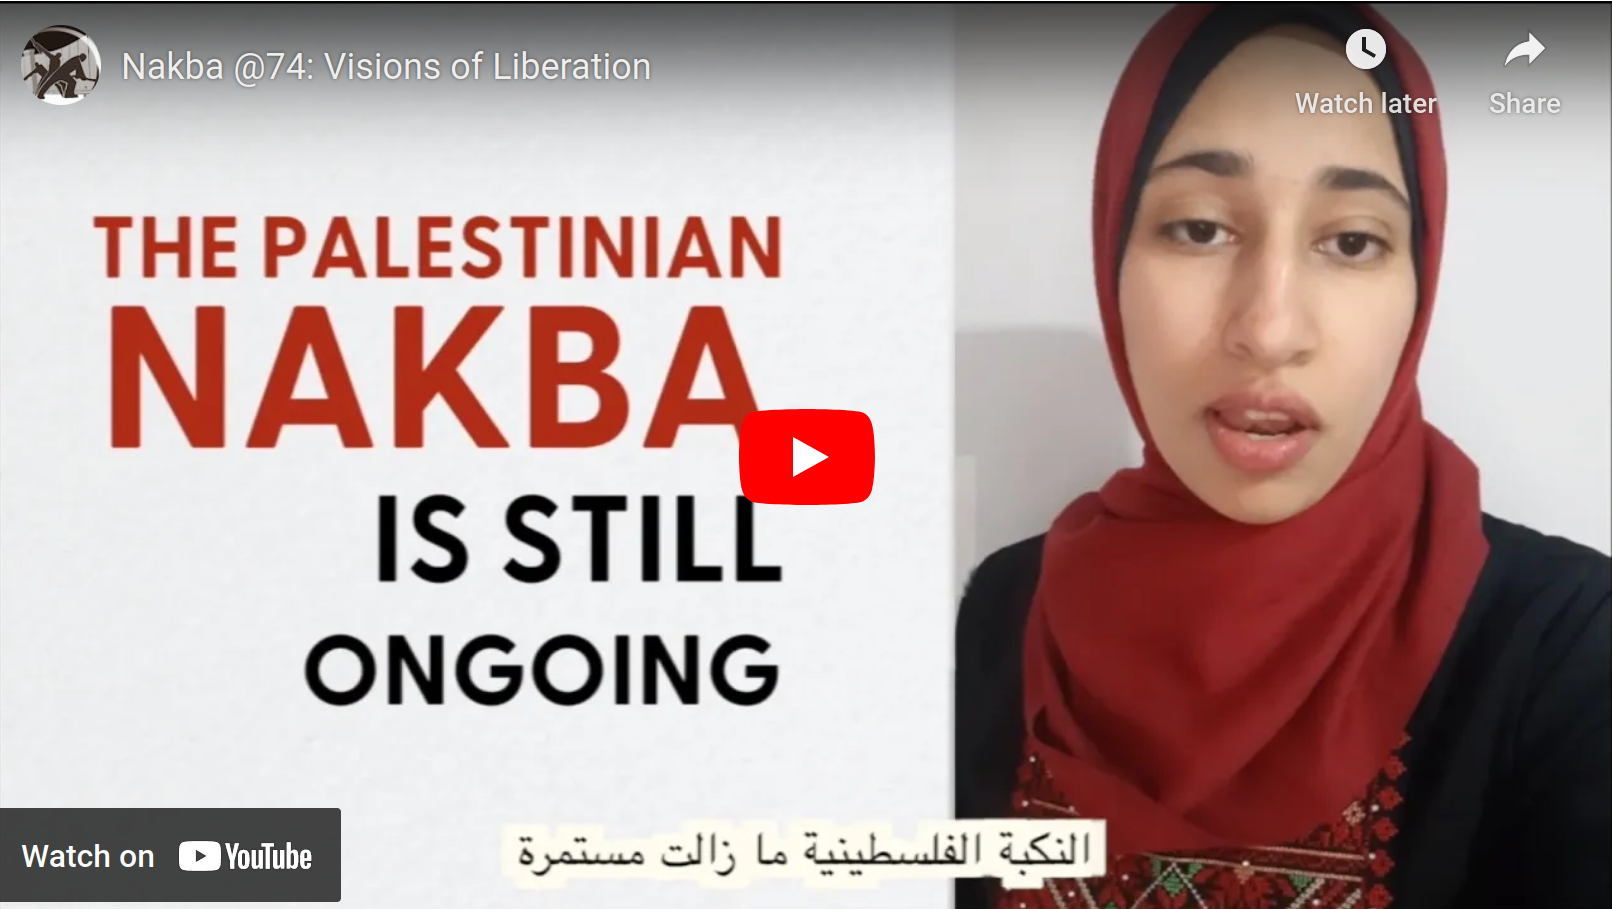 Nakba @74: 2 new videos to #EndEthnicCleansing